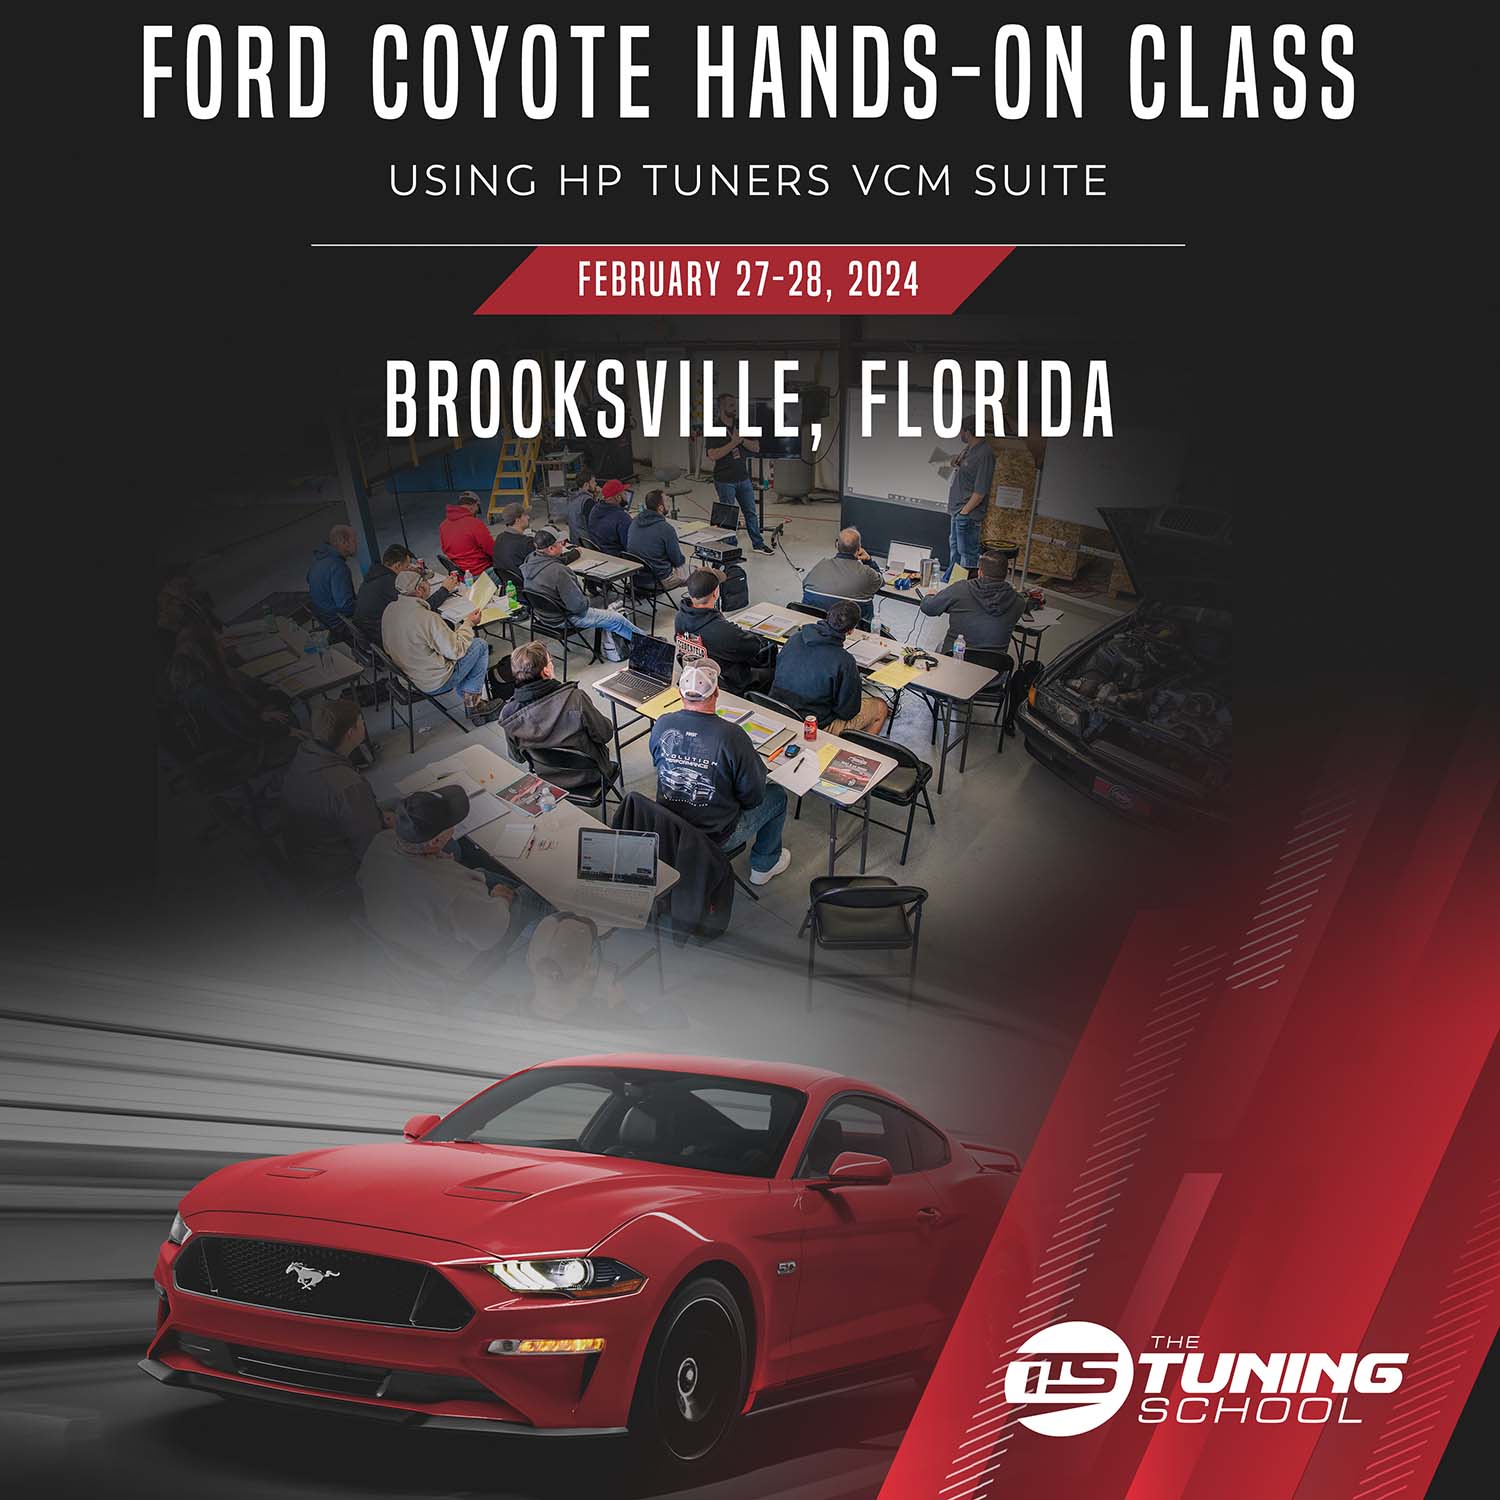 Ford Coyote Hands-On Class using HP Tuners - Brooksville, February 2024 -NO PRINTED COURSE